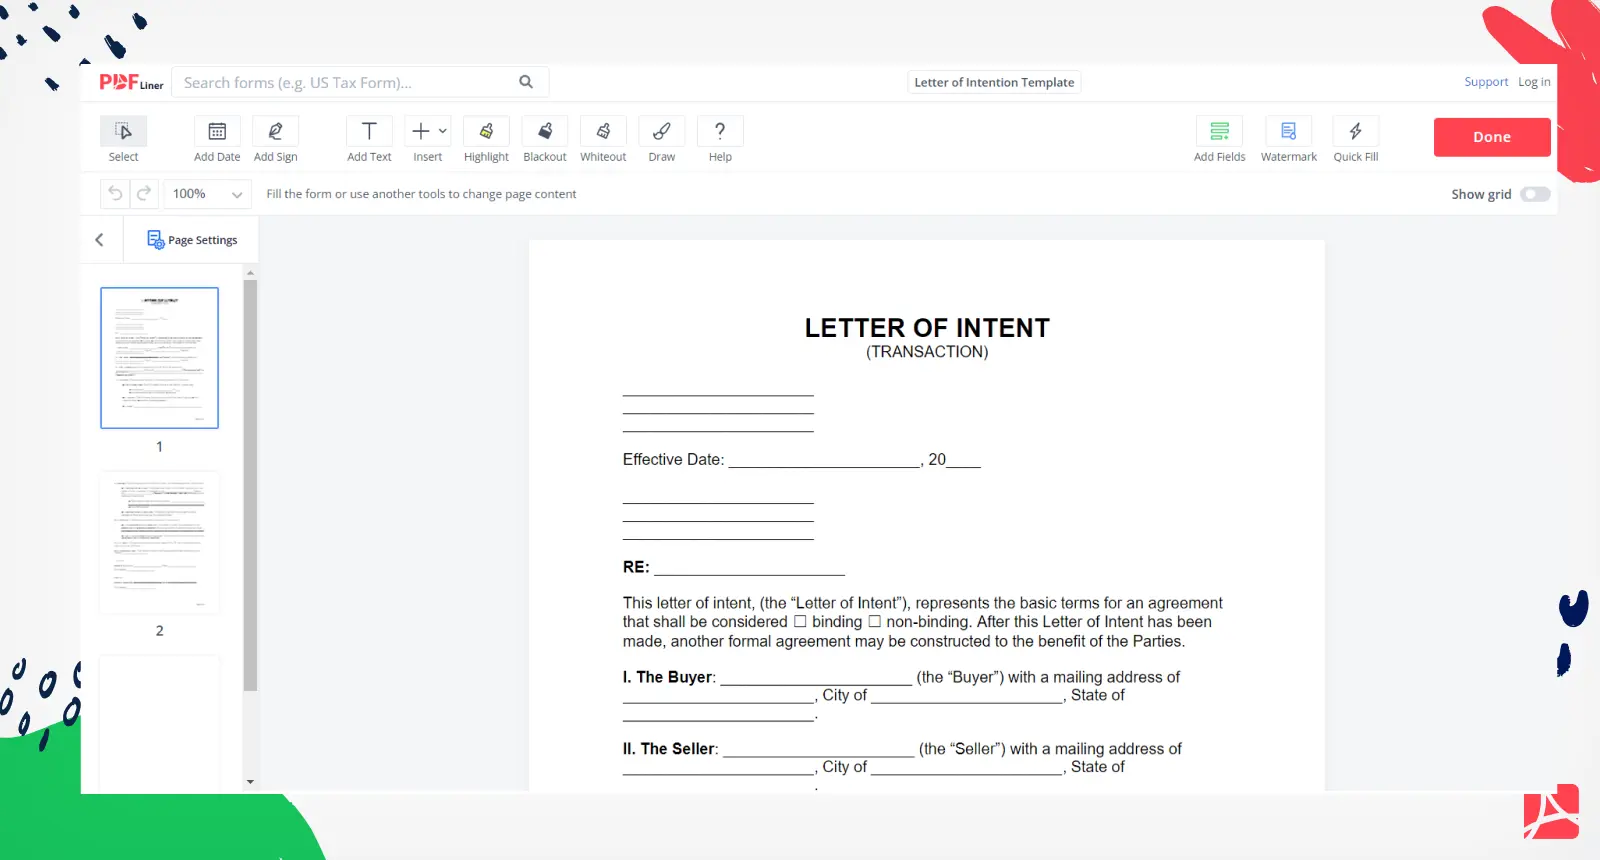 Letter of Intention Template Form Screenshot